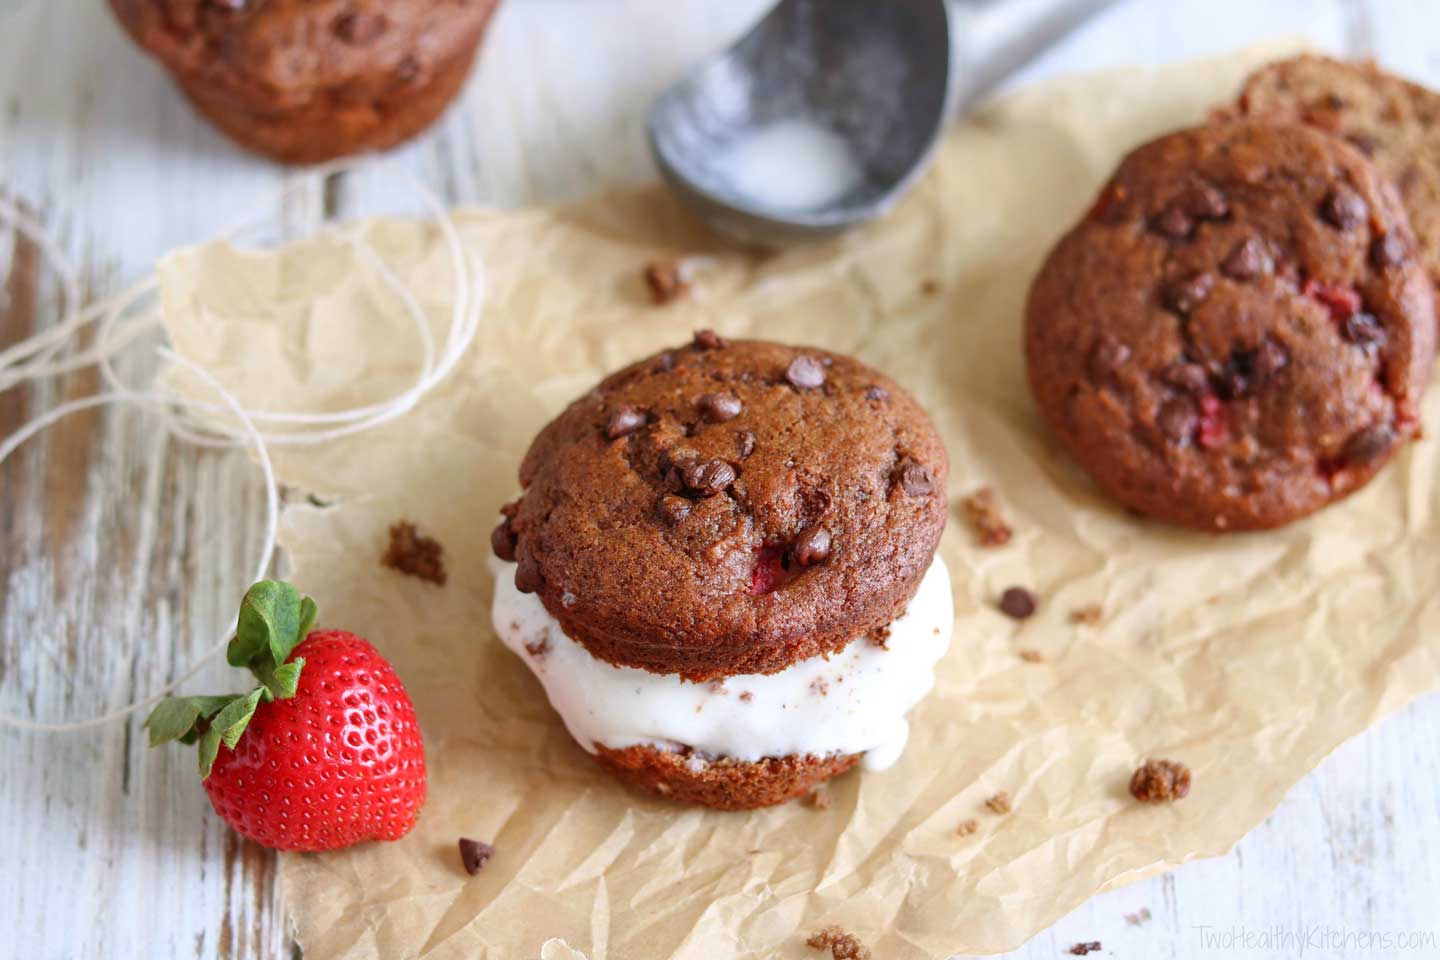 Take delicious, healthy breakfast muffins … add ice cream … and you’ve got a decadent dessert! Muffin ice cream sandwiches! Bursting with fresh strawberries and double chocolate! One batch of muffins = two great recipes! | www.TwoHealthyKitchens.com